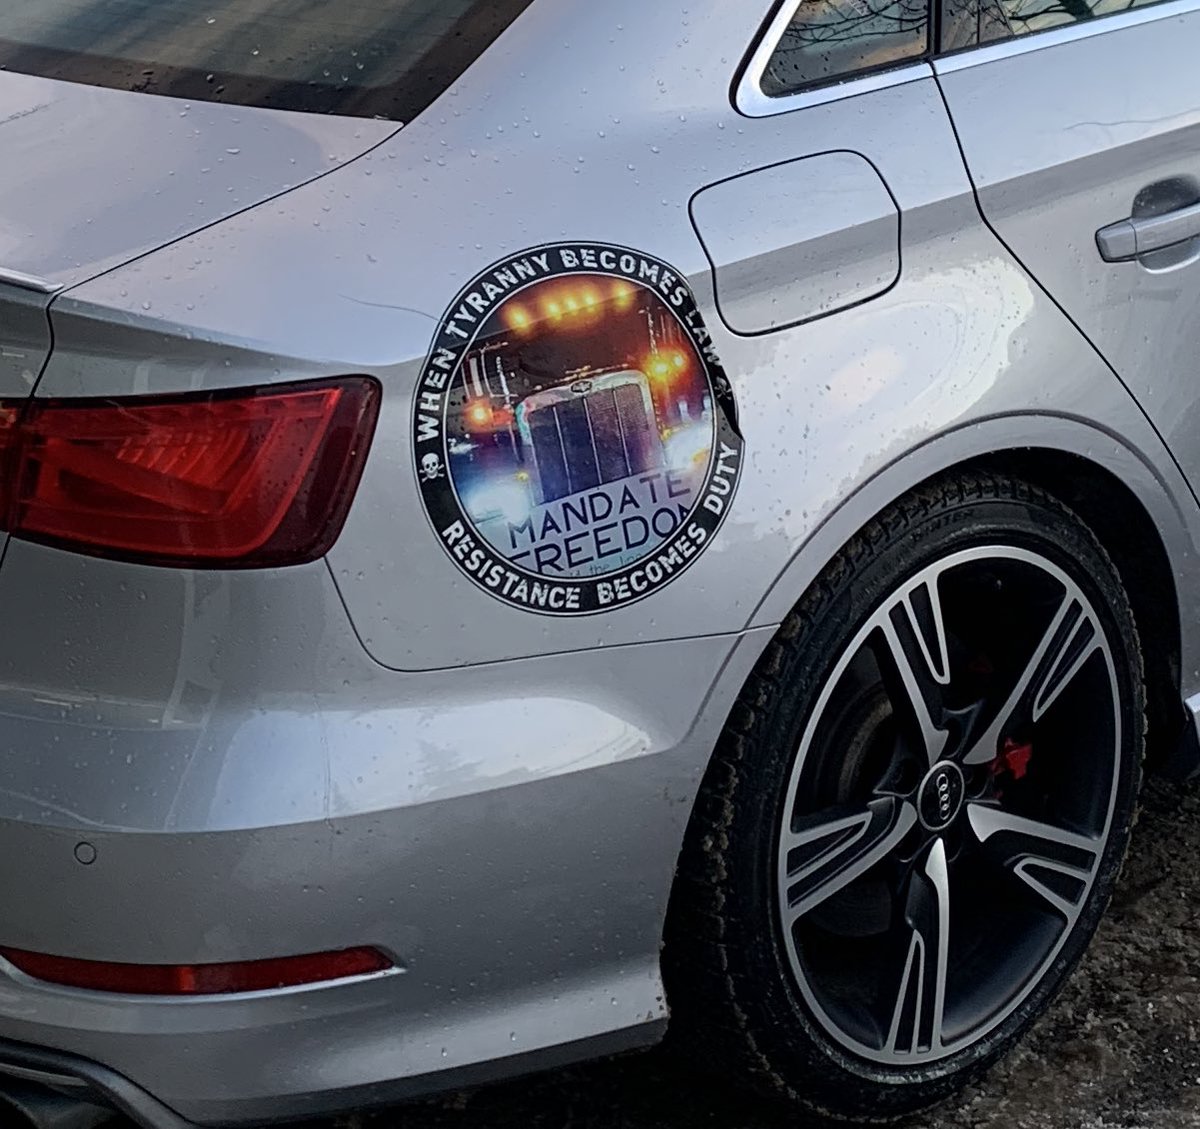 @CommonCanadianJ This is my car at the #TruckersConvoy2022

The decal was designed by a guy in Kenora, Ontario
“When Tyranny Becomes Law, Resistance Becomes Duty”

“Mandate Freedom”

He gave it to me when he offered me a bed to sleep in on our way to Ottawa in January, 2022

A True Patriot ❤️🇨🇦